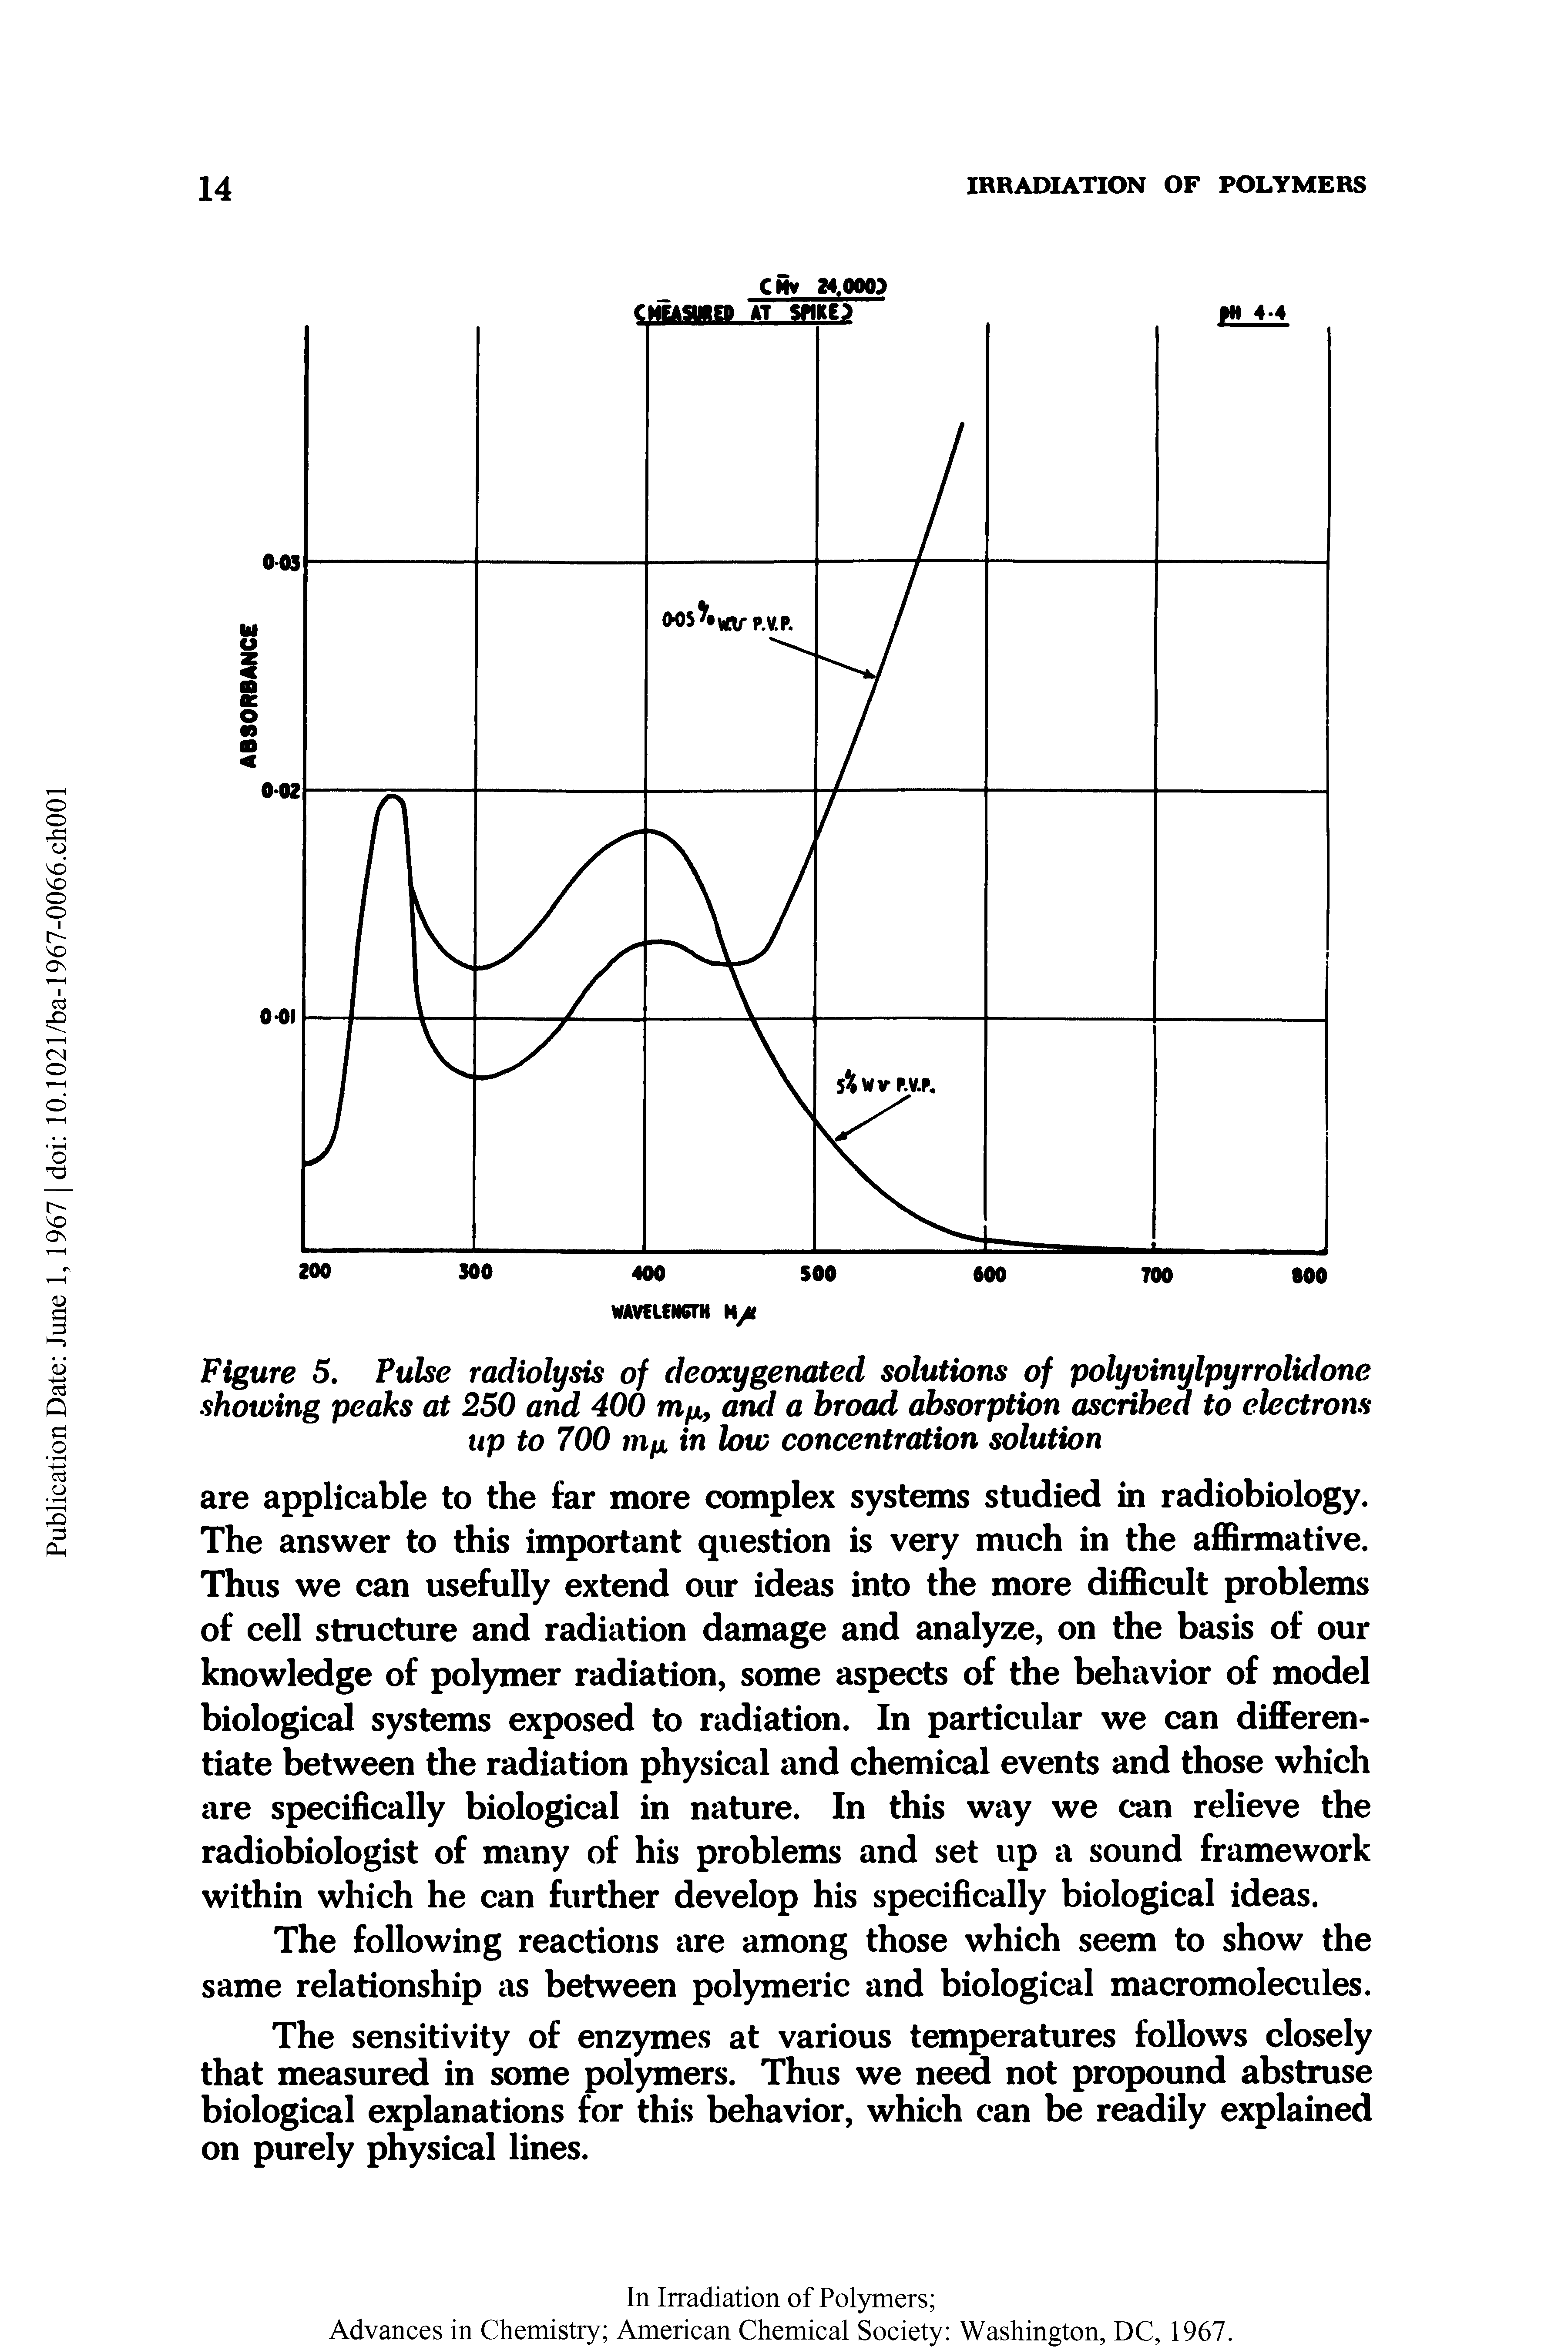 Figure 5. Pulse radiolysis of deoxygenated solutions of polyvinylpyrrolidone showing peaks at 250 and 400 nt/x, and a broad absorption ascribed to electrons up to 700 inf, in low concentration solution...